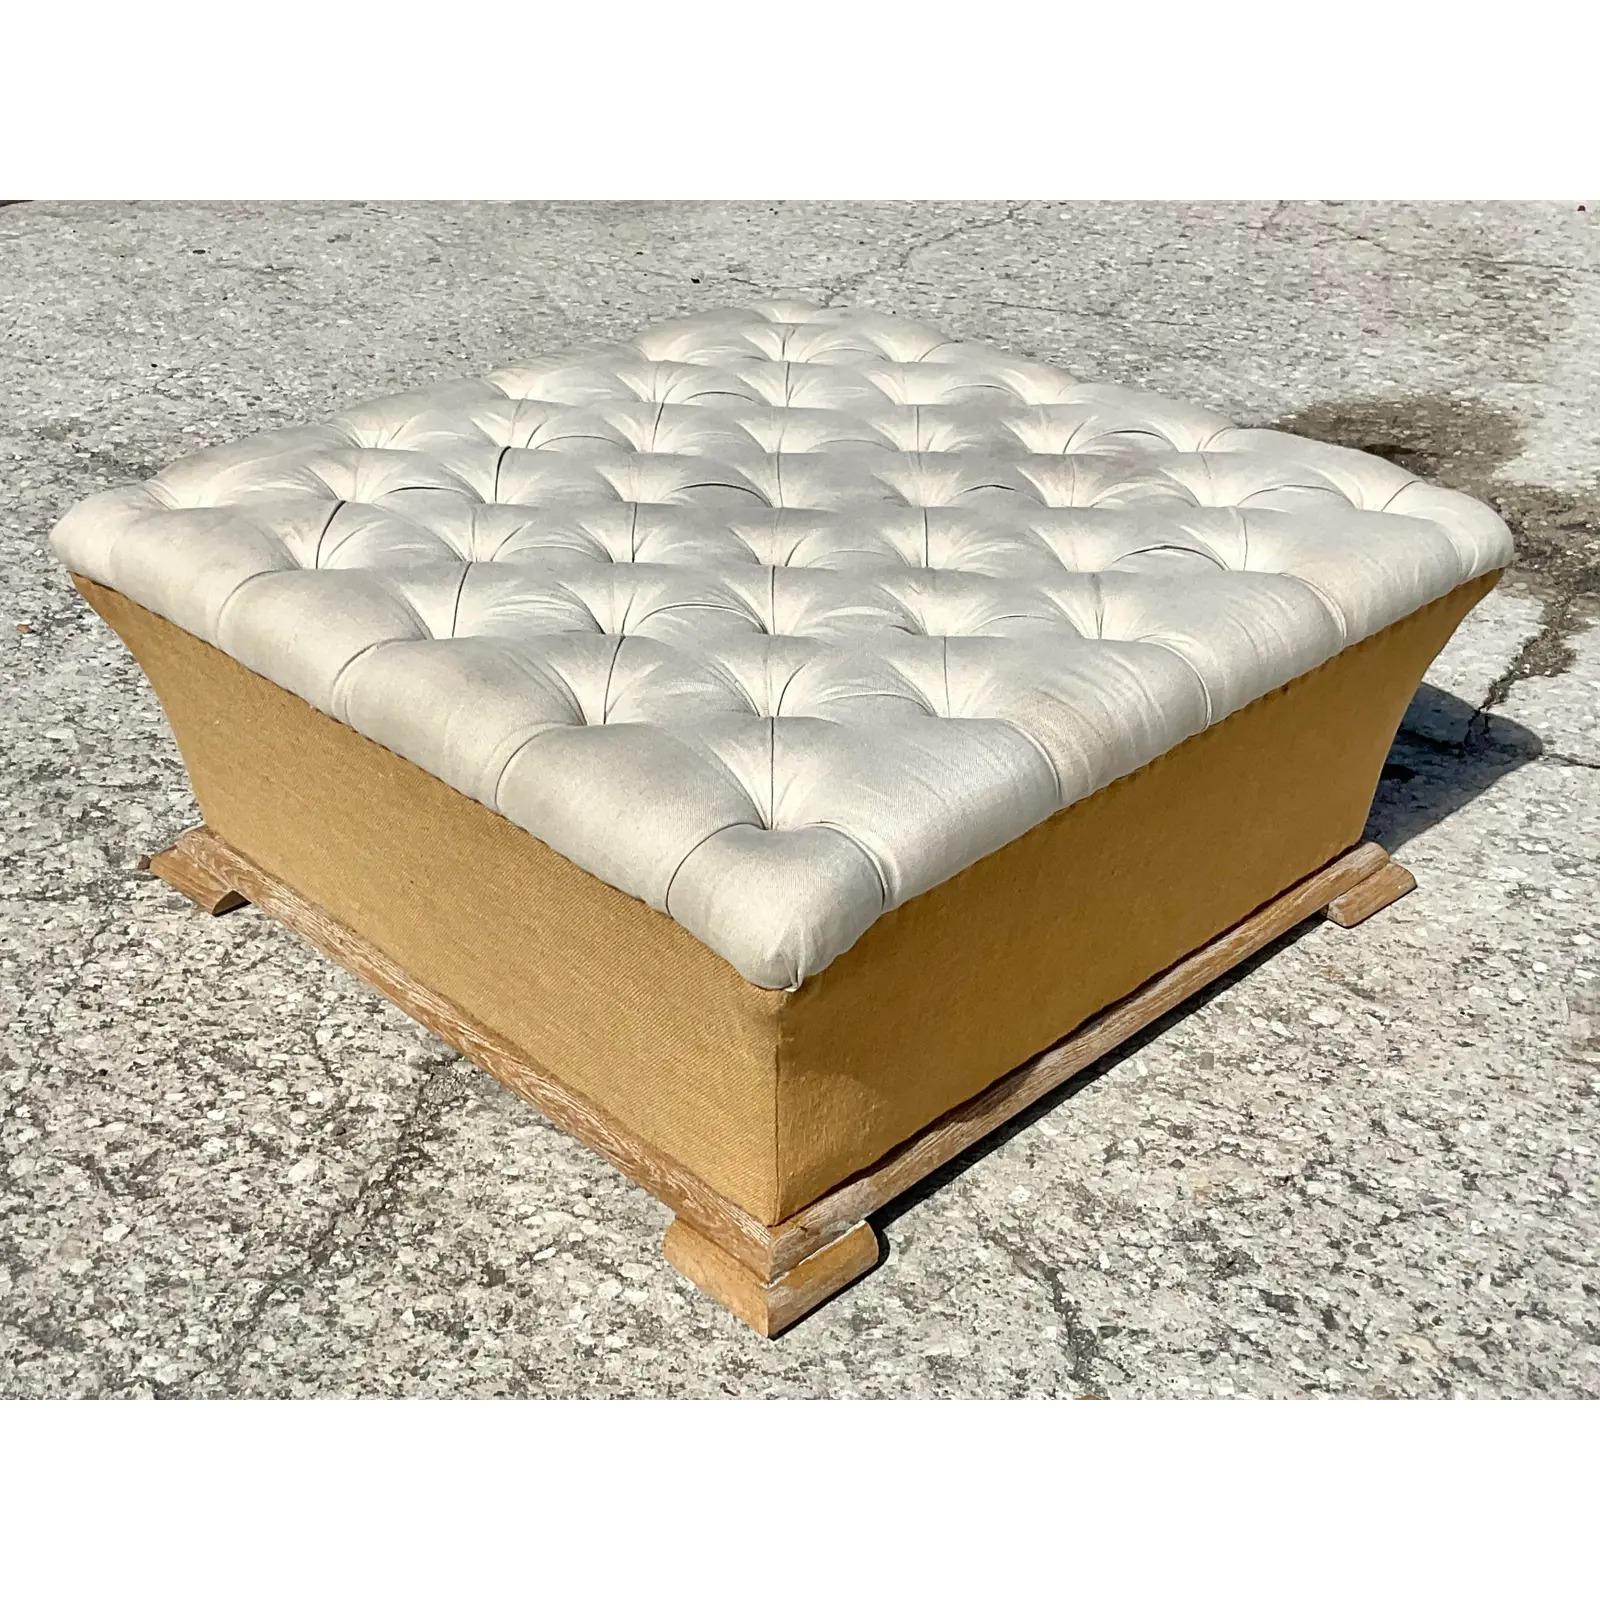 A fabulous vintage Boho ottoman. Beautiful tufted top in a linen cotton blend. The bottom half is upholstered in a beautiful burlap and rests on a cerused oak plinth. Acquired from a Palm Beach estate.